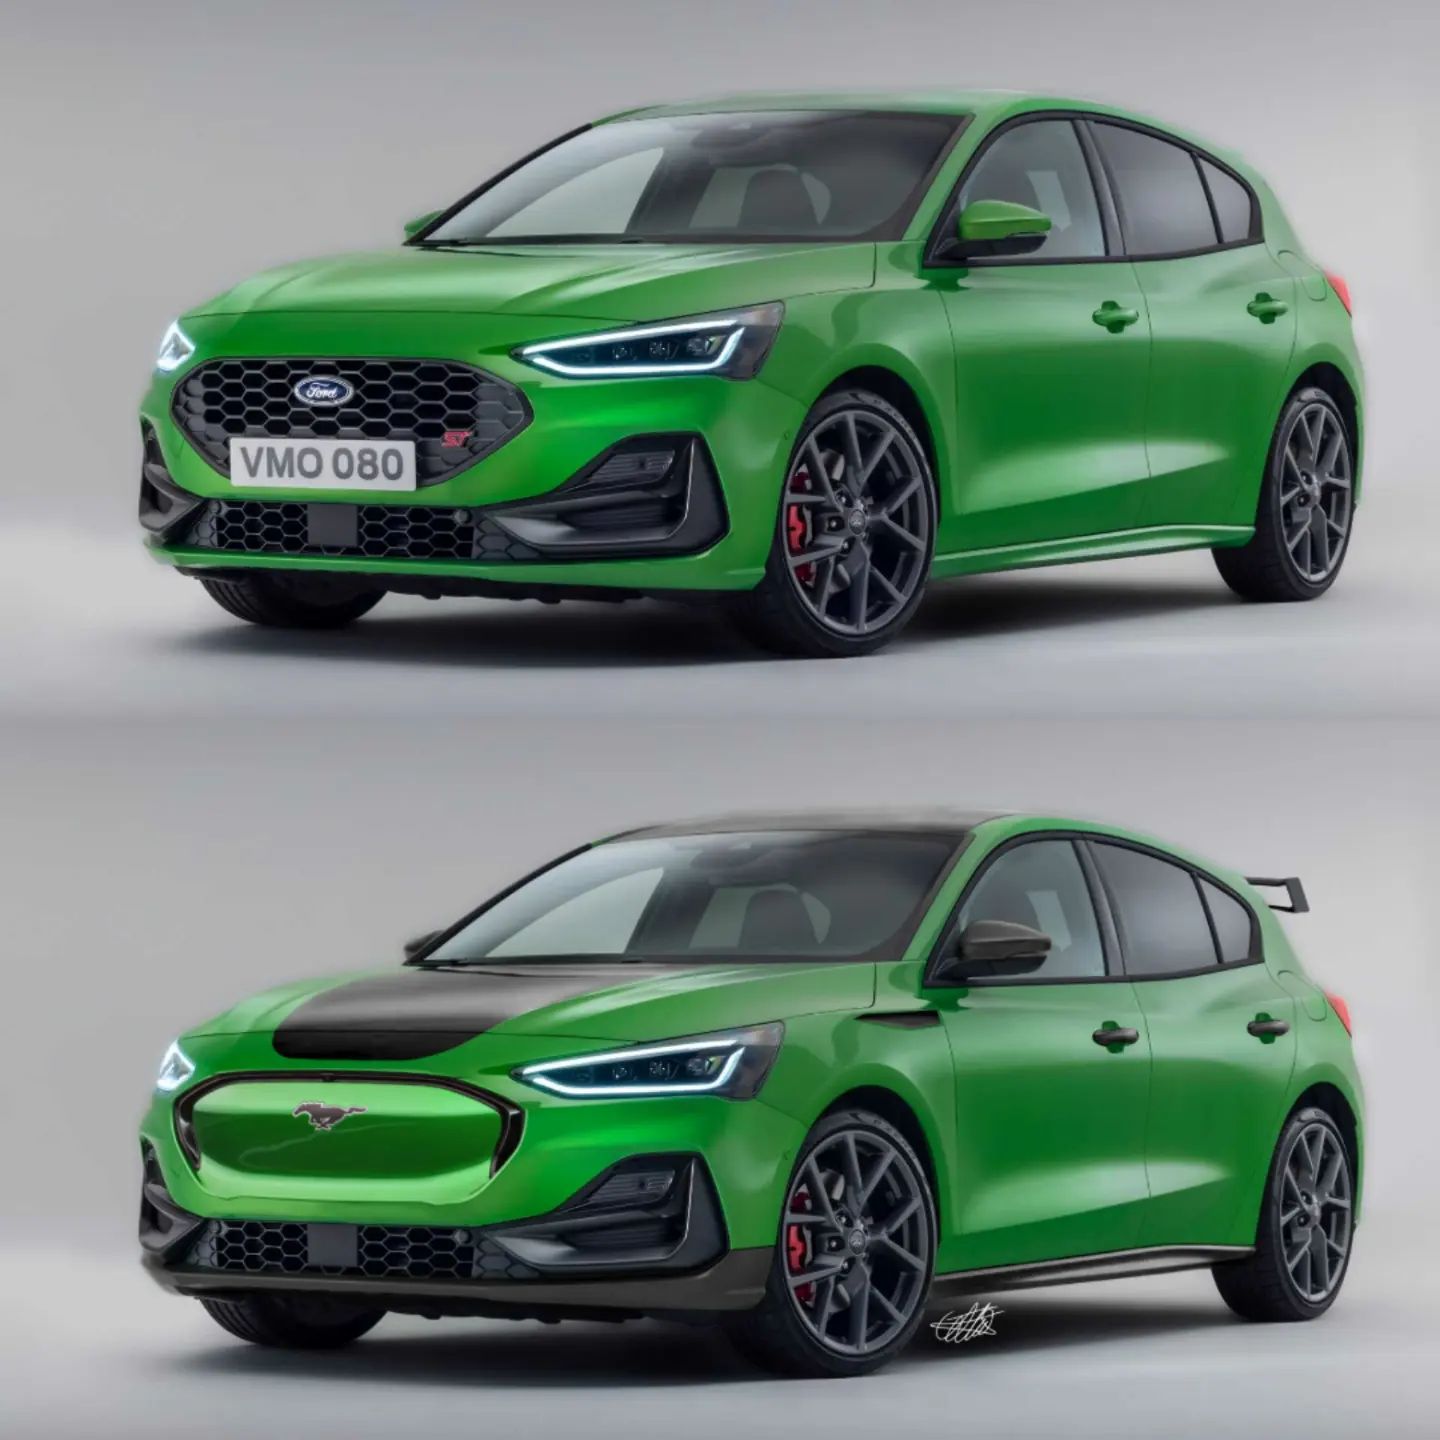 https://s1.cdn.autoevolution.com/images/news/ford-focus-st-gets-unexpected-mach-e-redesign-doesnt-look-cgi-bad-at-all-207706_1.jpg